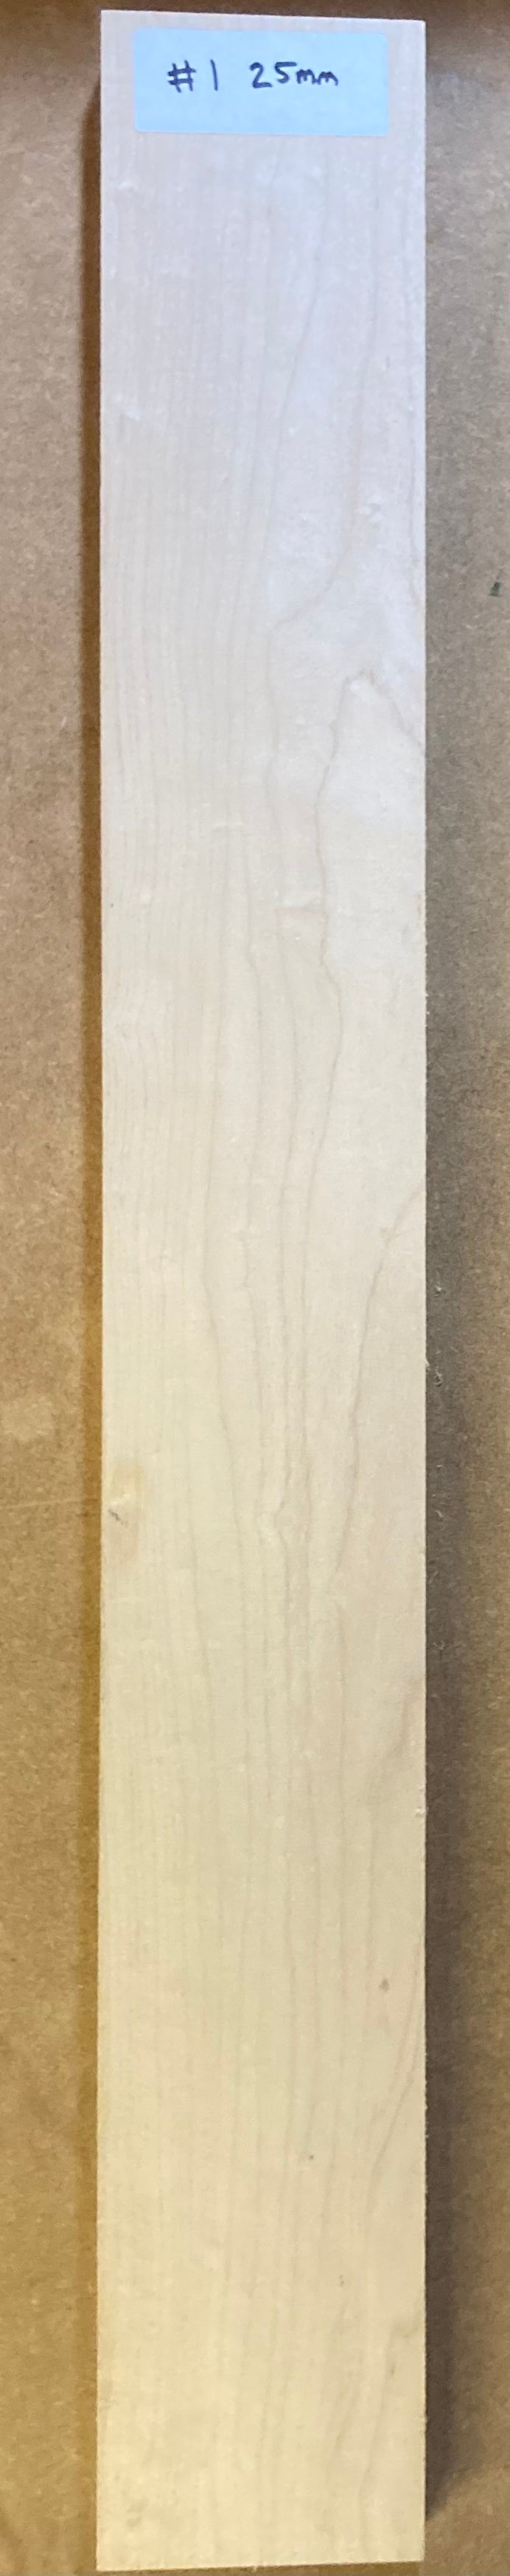 Electric Neck Blank - Maple #1